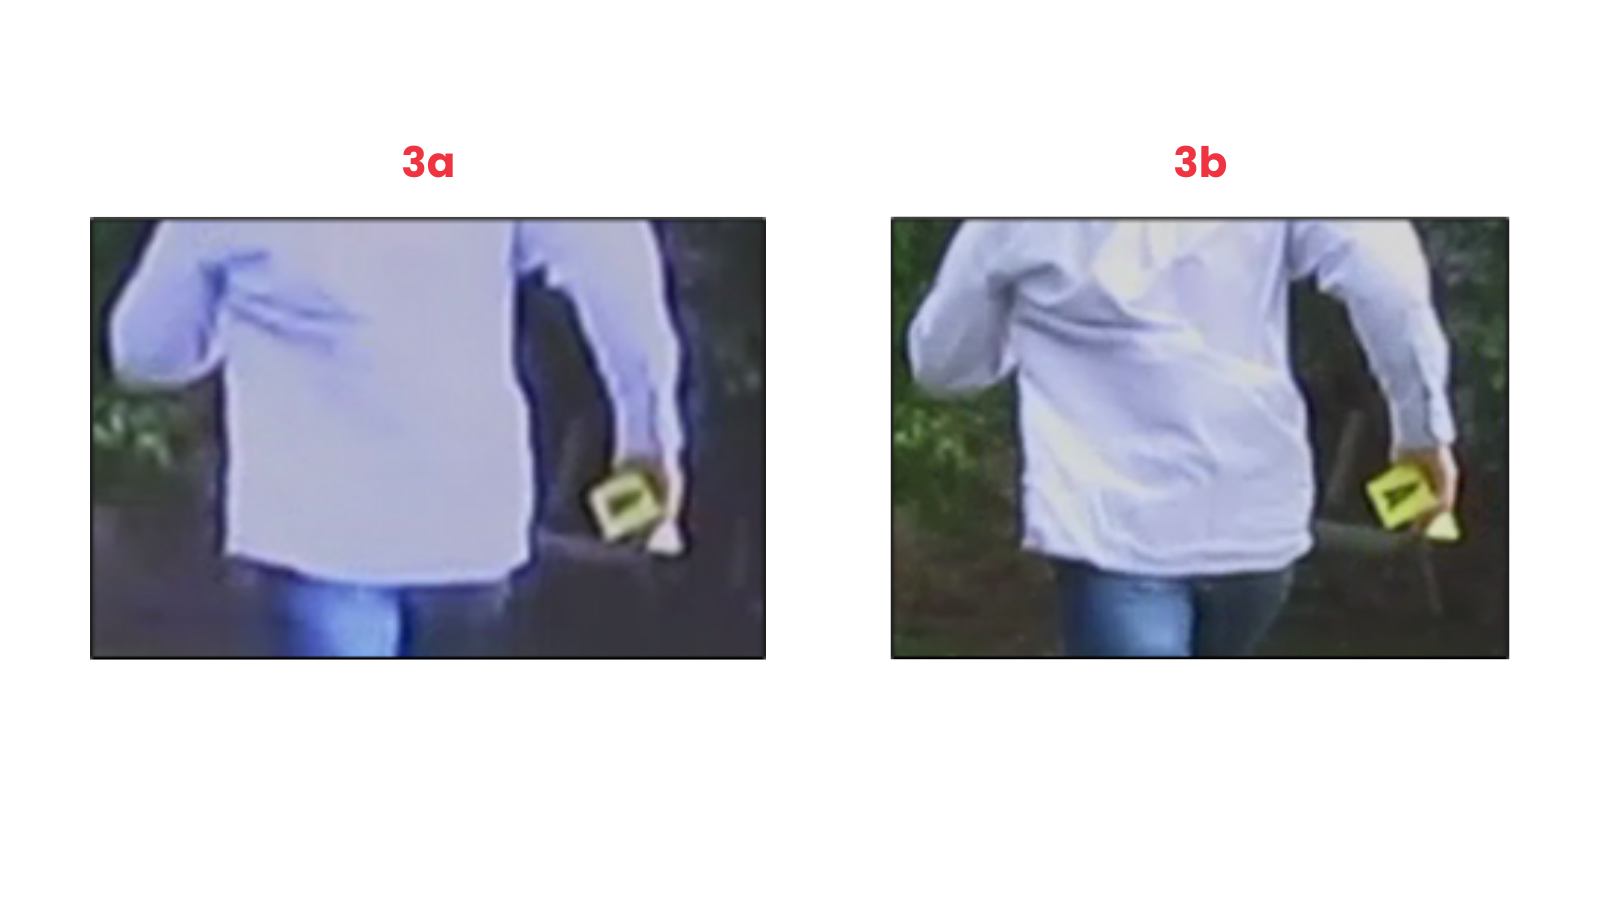 Comparison of a cropped frame from video clips a) filmed as it played on a screen and b) from a working copy